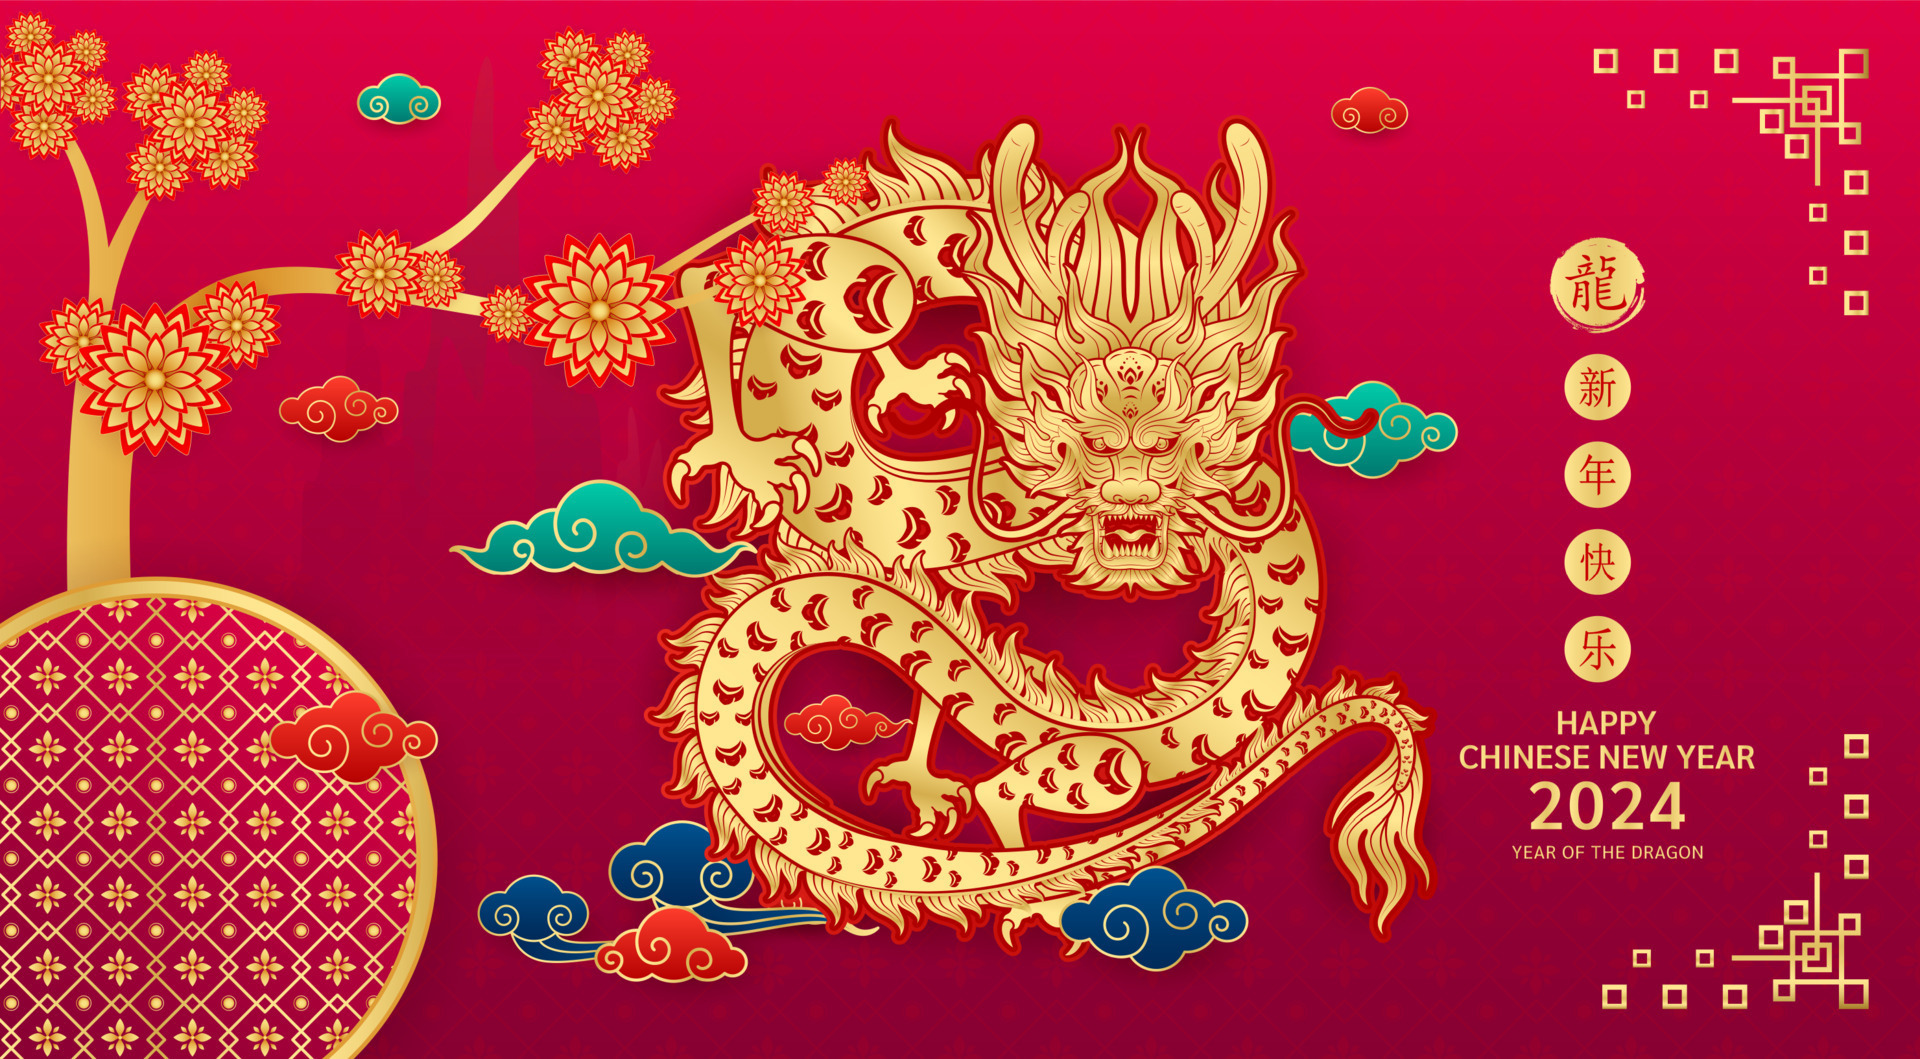 Card Happy Chinese New Year 2024. Chinese dragon gold two zodiac sign